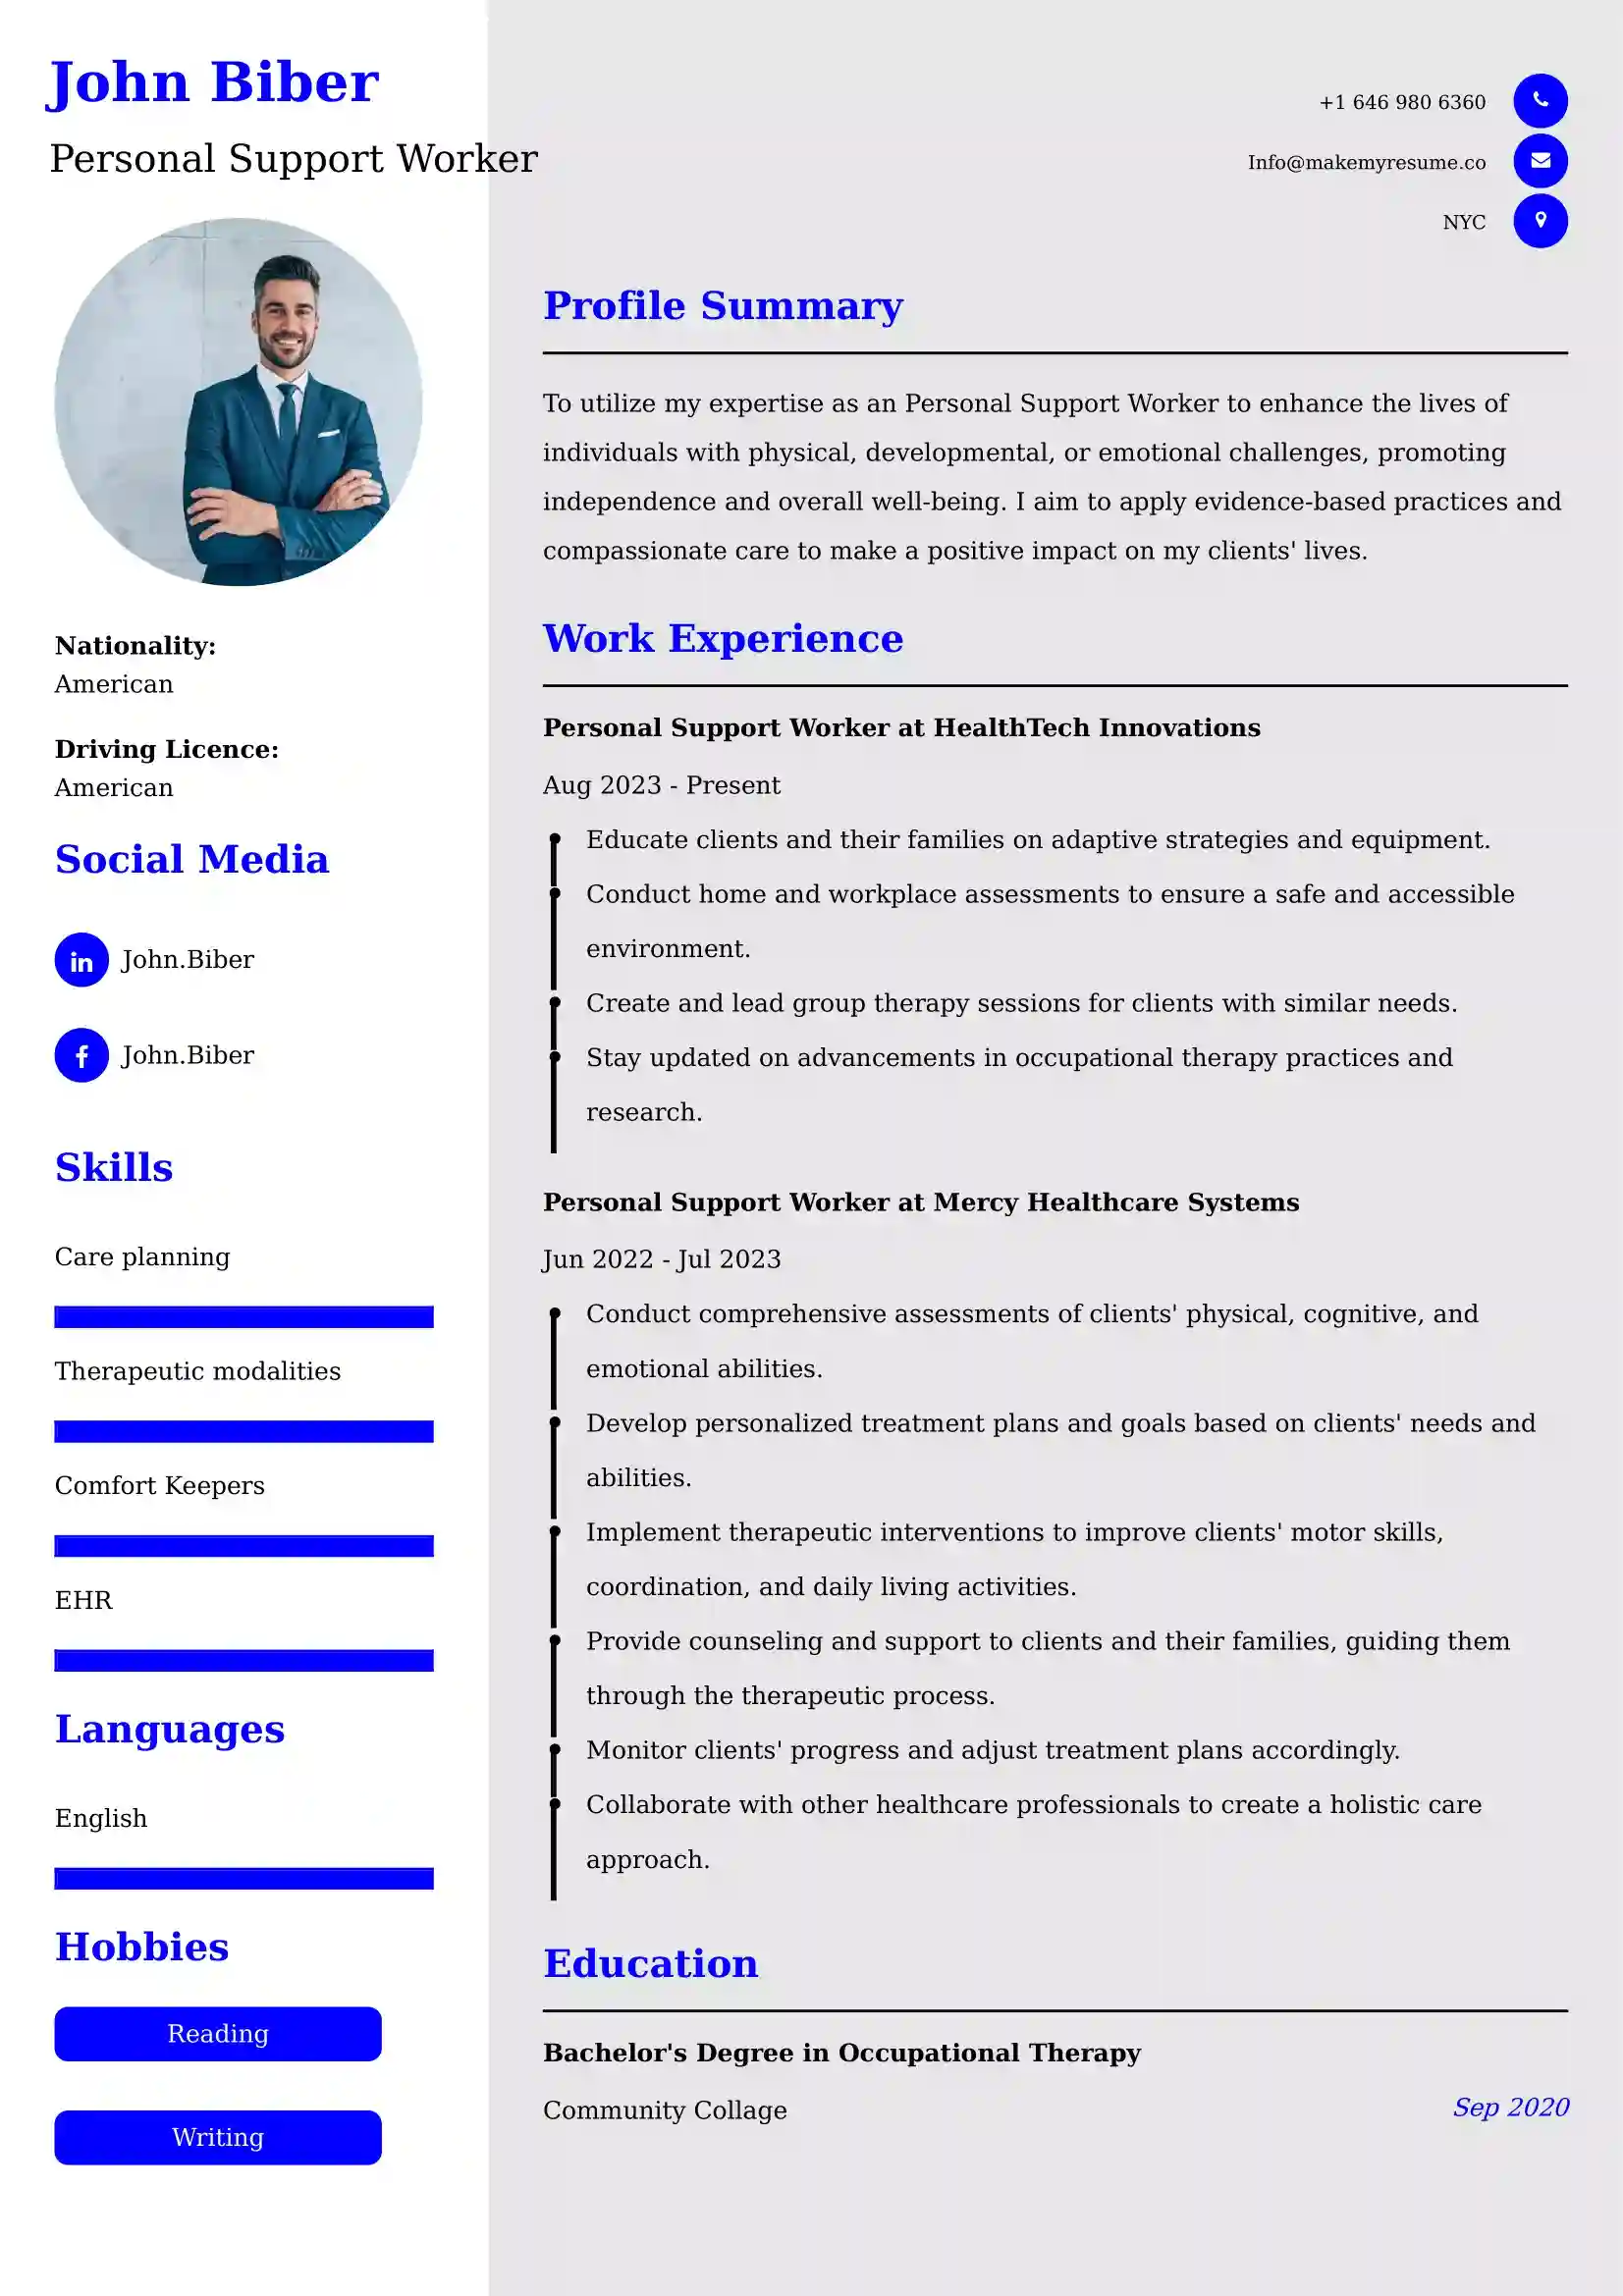 Personal Support Worker Resume Examples - Brazilian Format, Latest Template